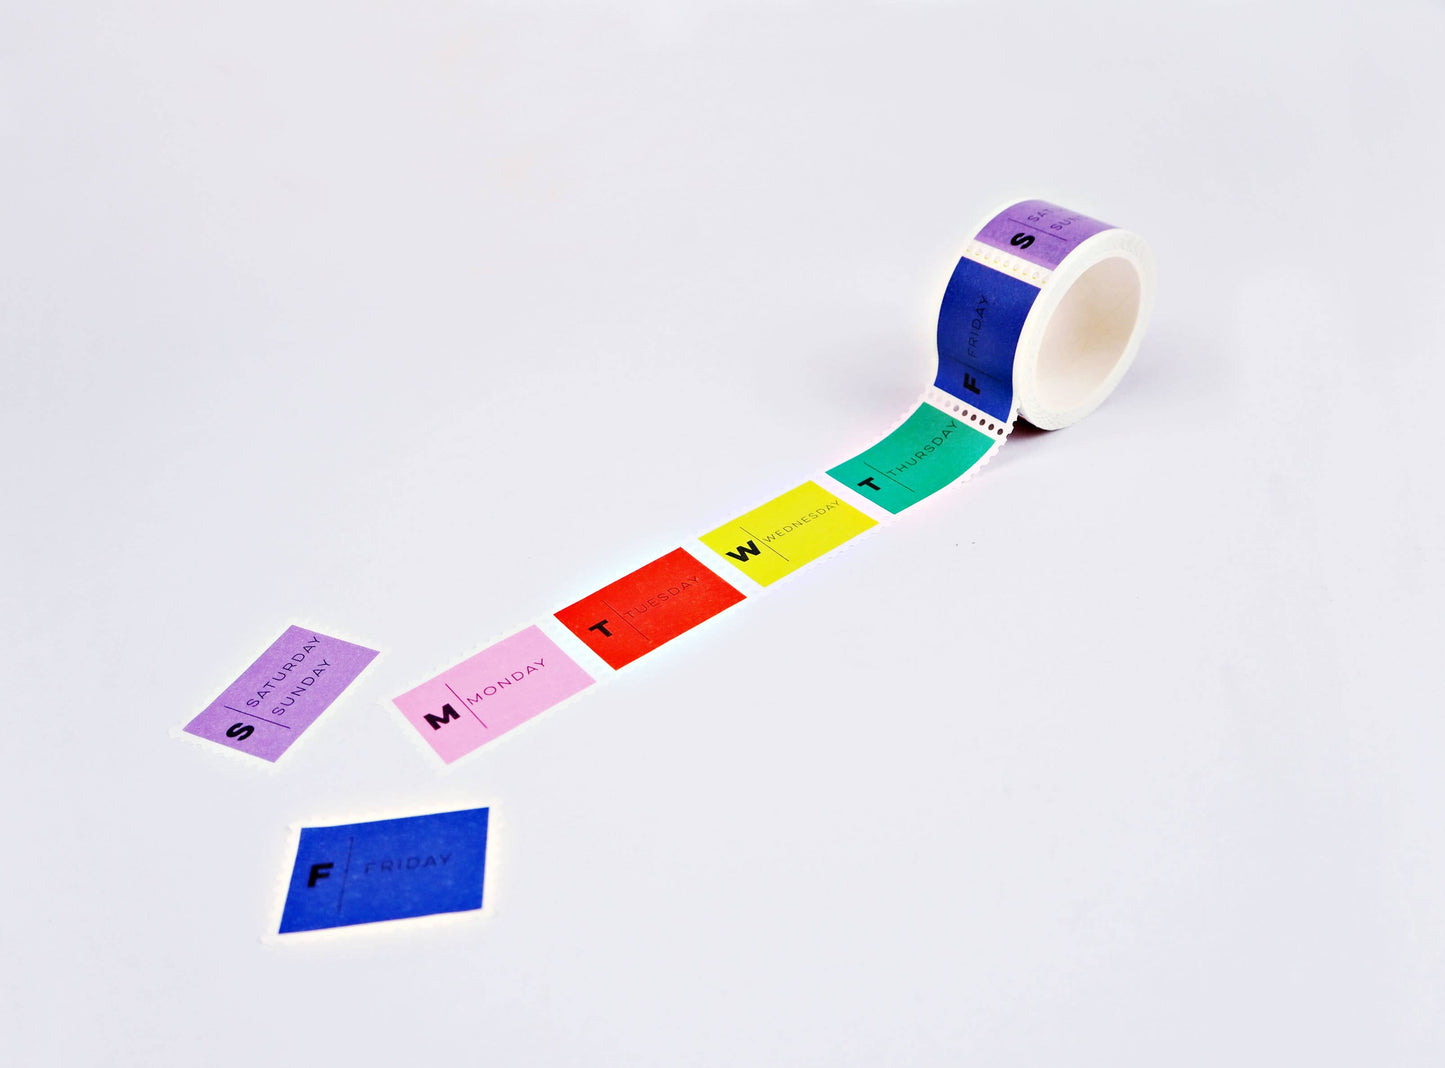 Primary Days of the Week Stamp Washi Tape